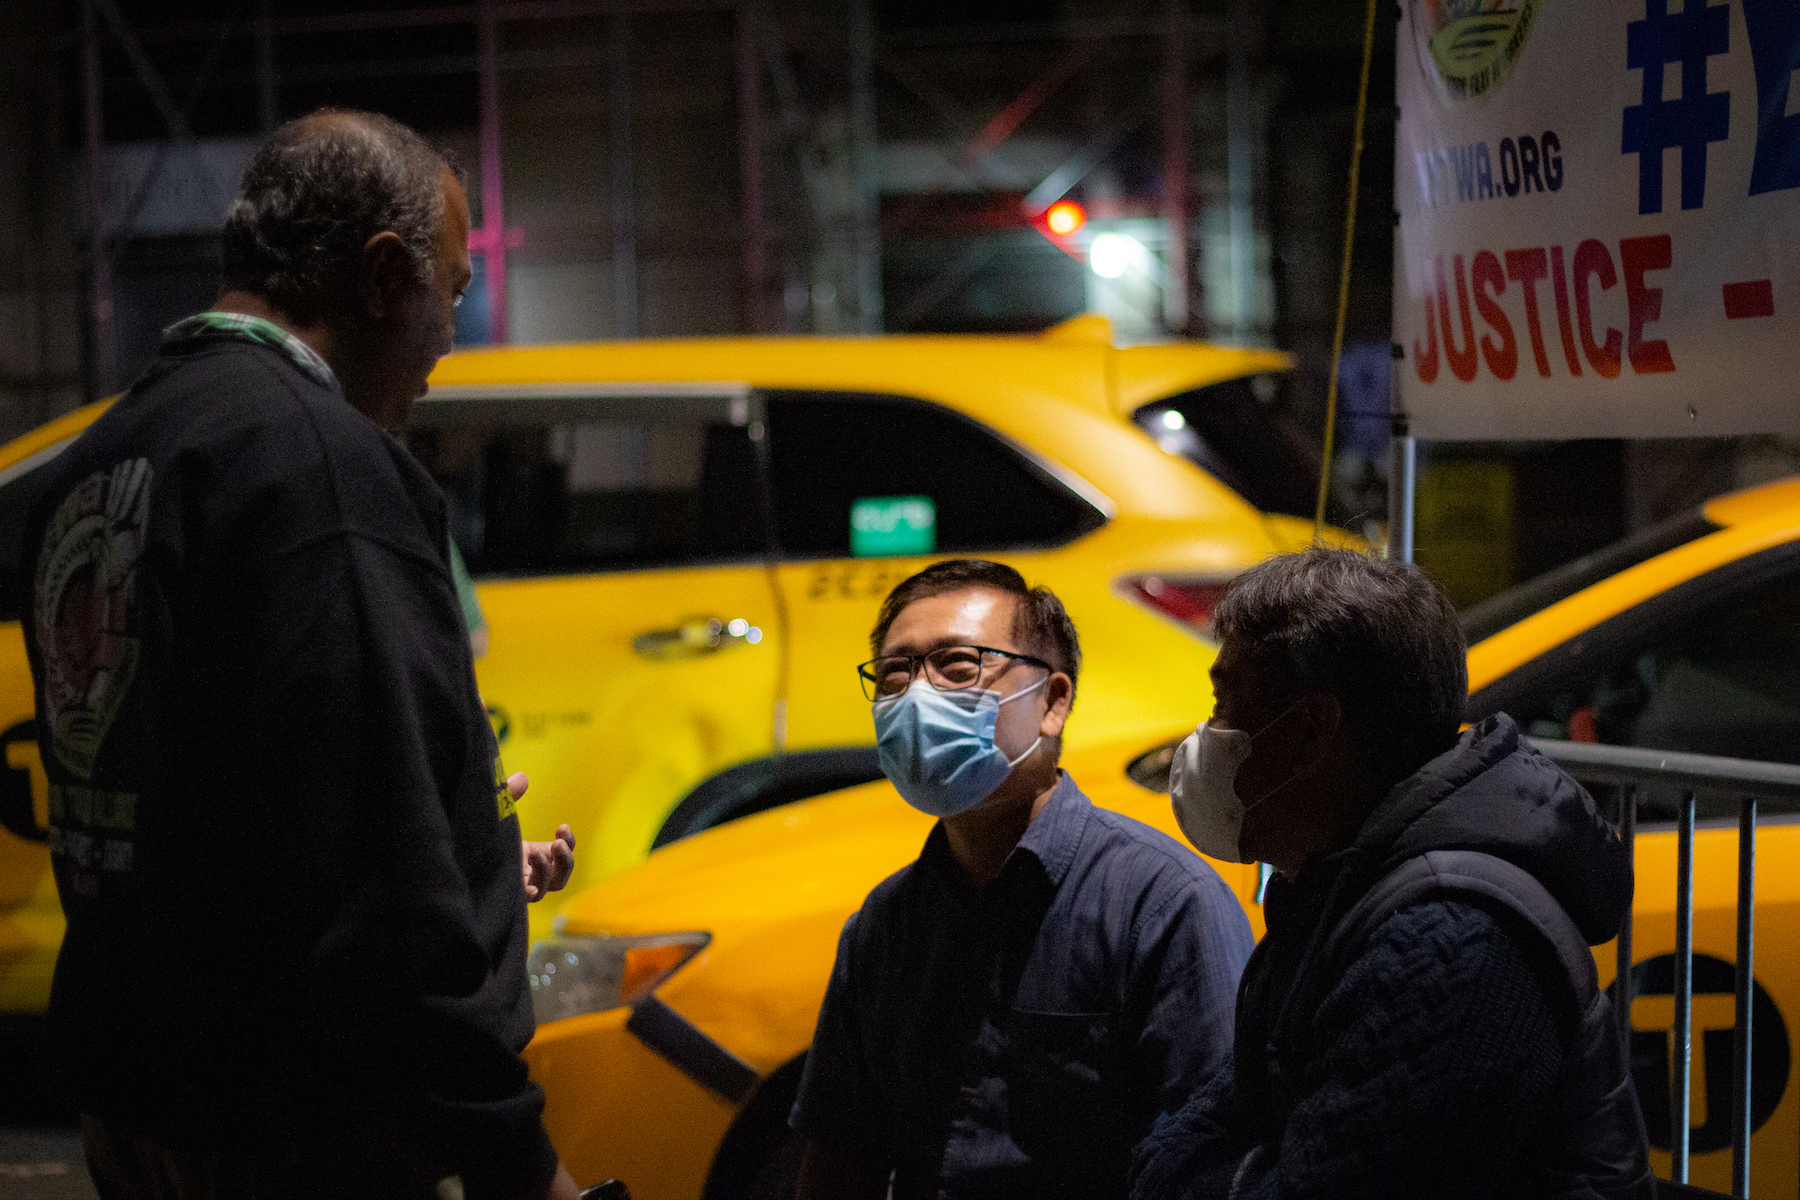 Three older men are talking on a dark New York City sidewalk, with yellow cabs parked in the street behind them. Two of the men are sitting on plastic folding chairs, and one has his face (with a medical face mask) illuminated by the street lights.